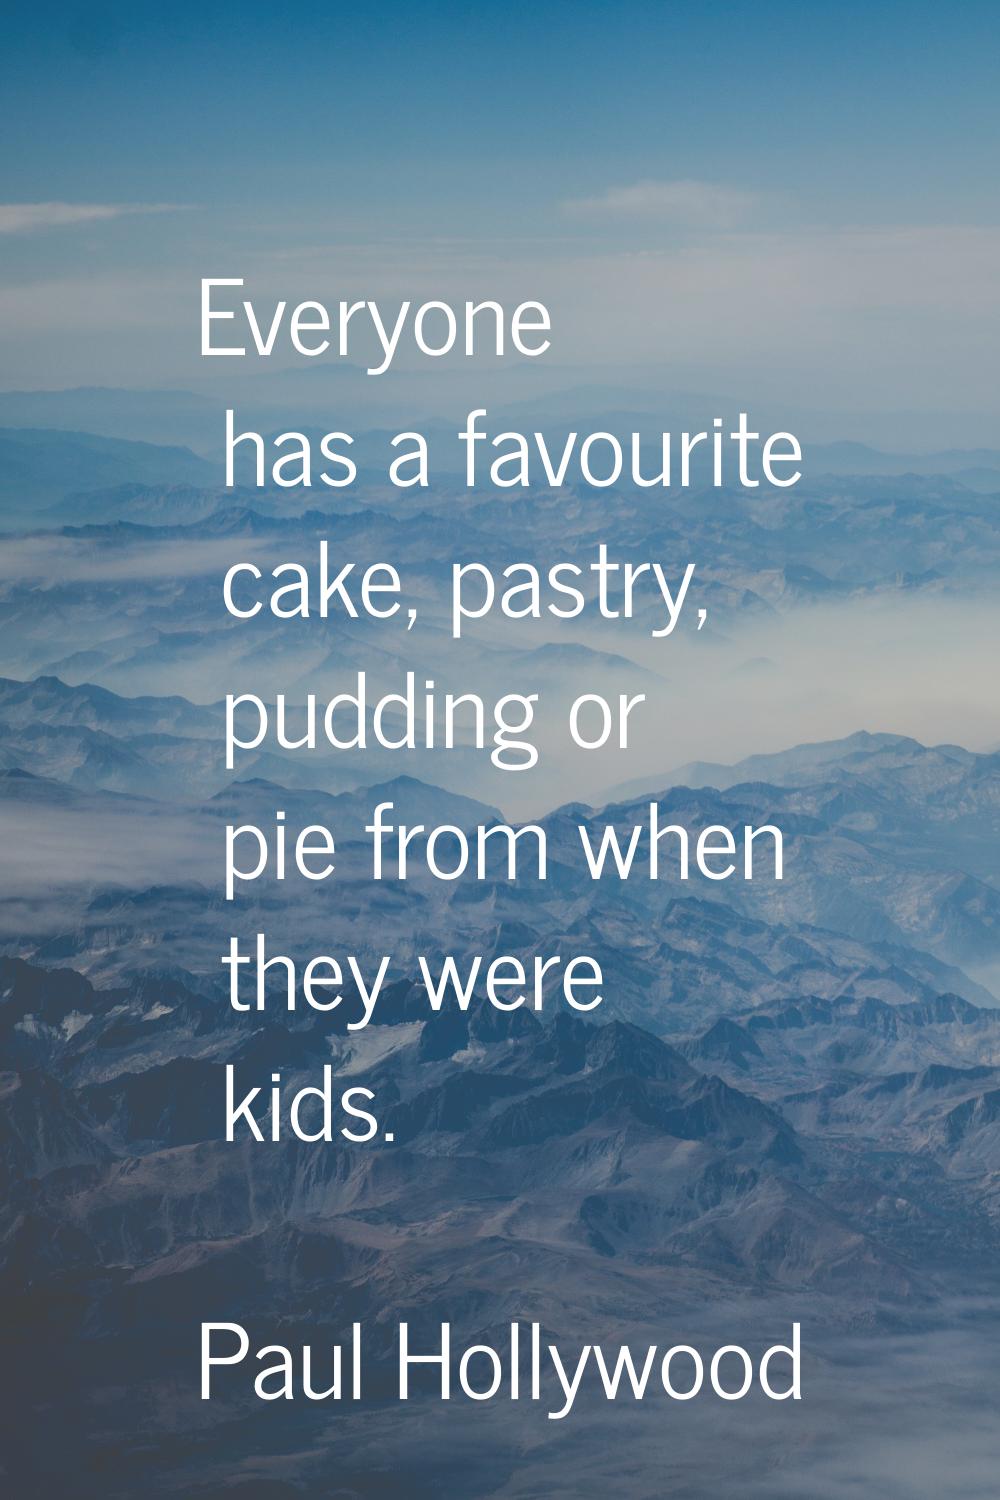 Everyone has a favourite cake, pastry, pudding or pie from when they were kids.